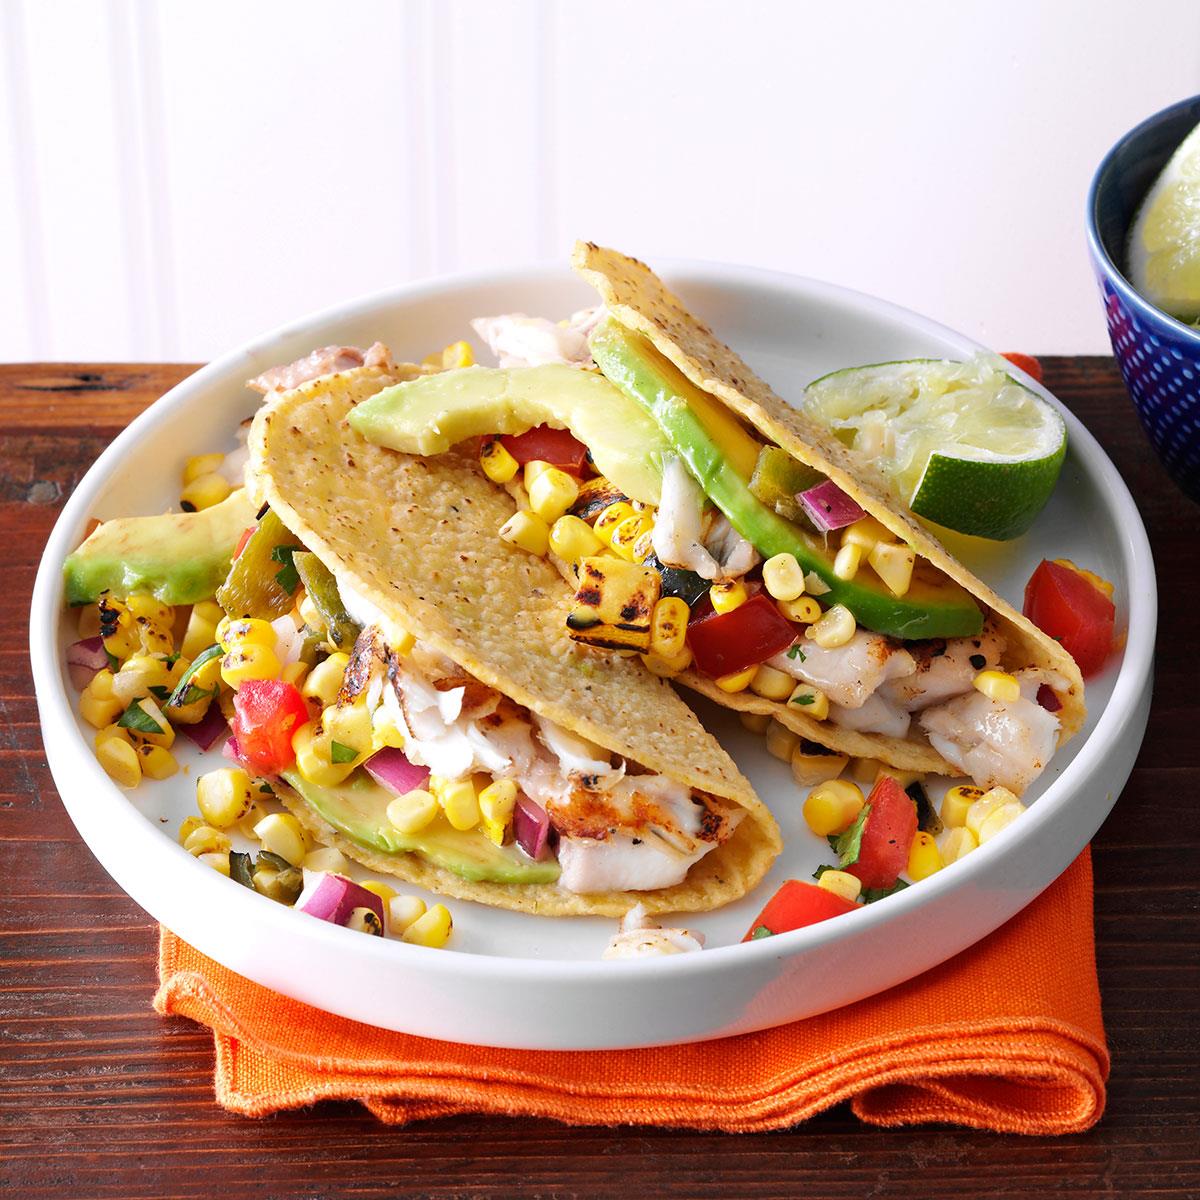 I like to serve fish tacos with quinoa and black beans for a complete and satisfying meal. If you’ve got them, add colorful summer toppings like bright peppers, green onions or purple carrots. —Camille Parker, Chicago, Illinois <a href="https://www.tasteofhome.com/recipes/summer-garden-fish-tacos/">Get Recipe</a>